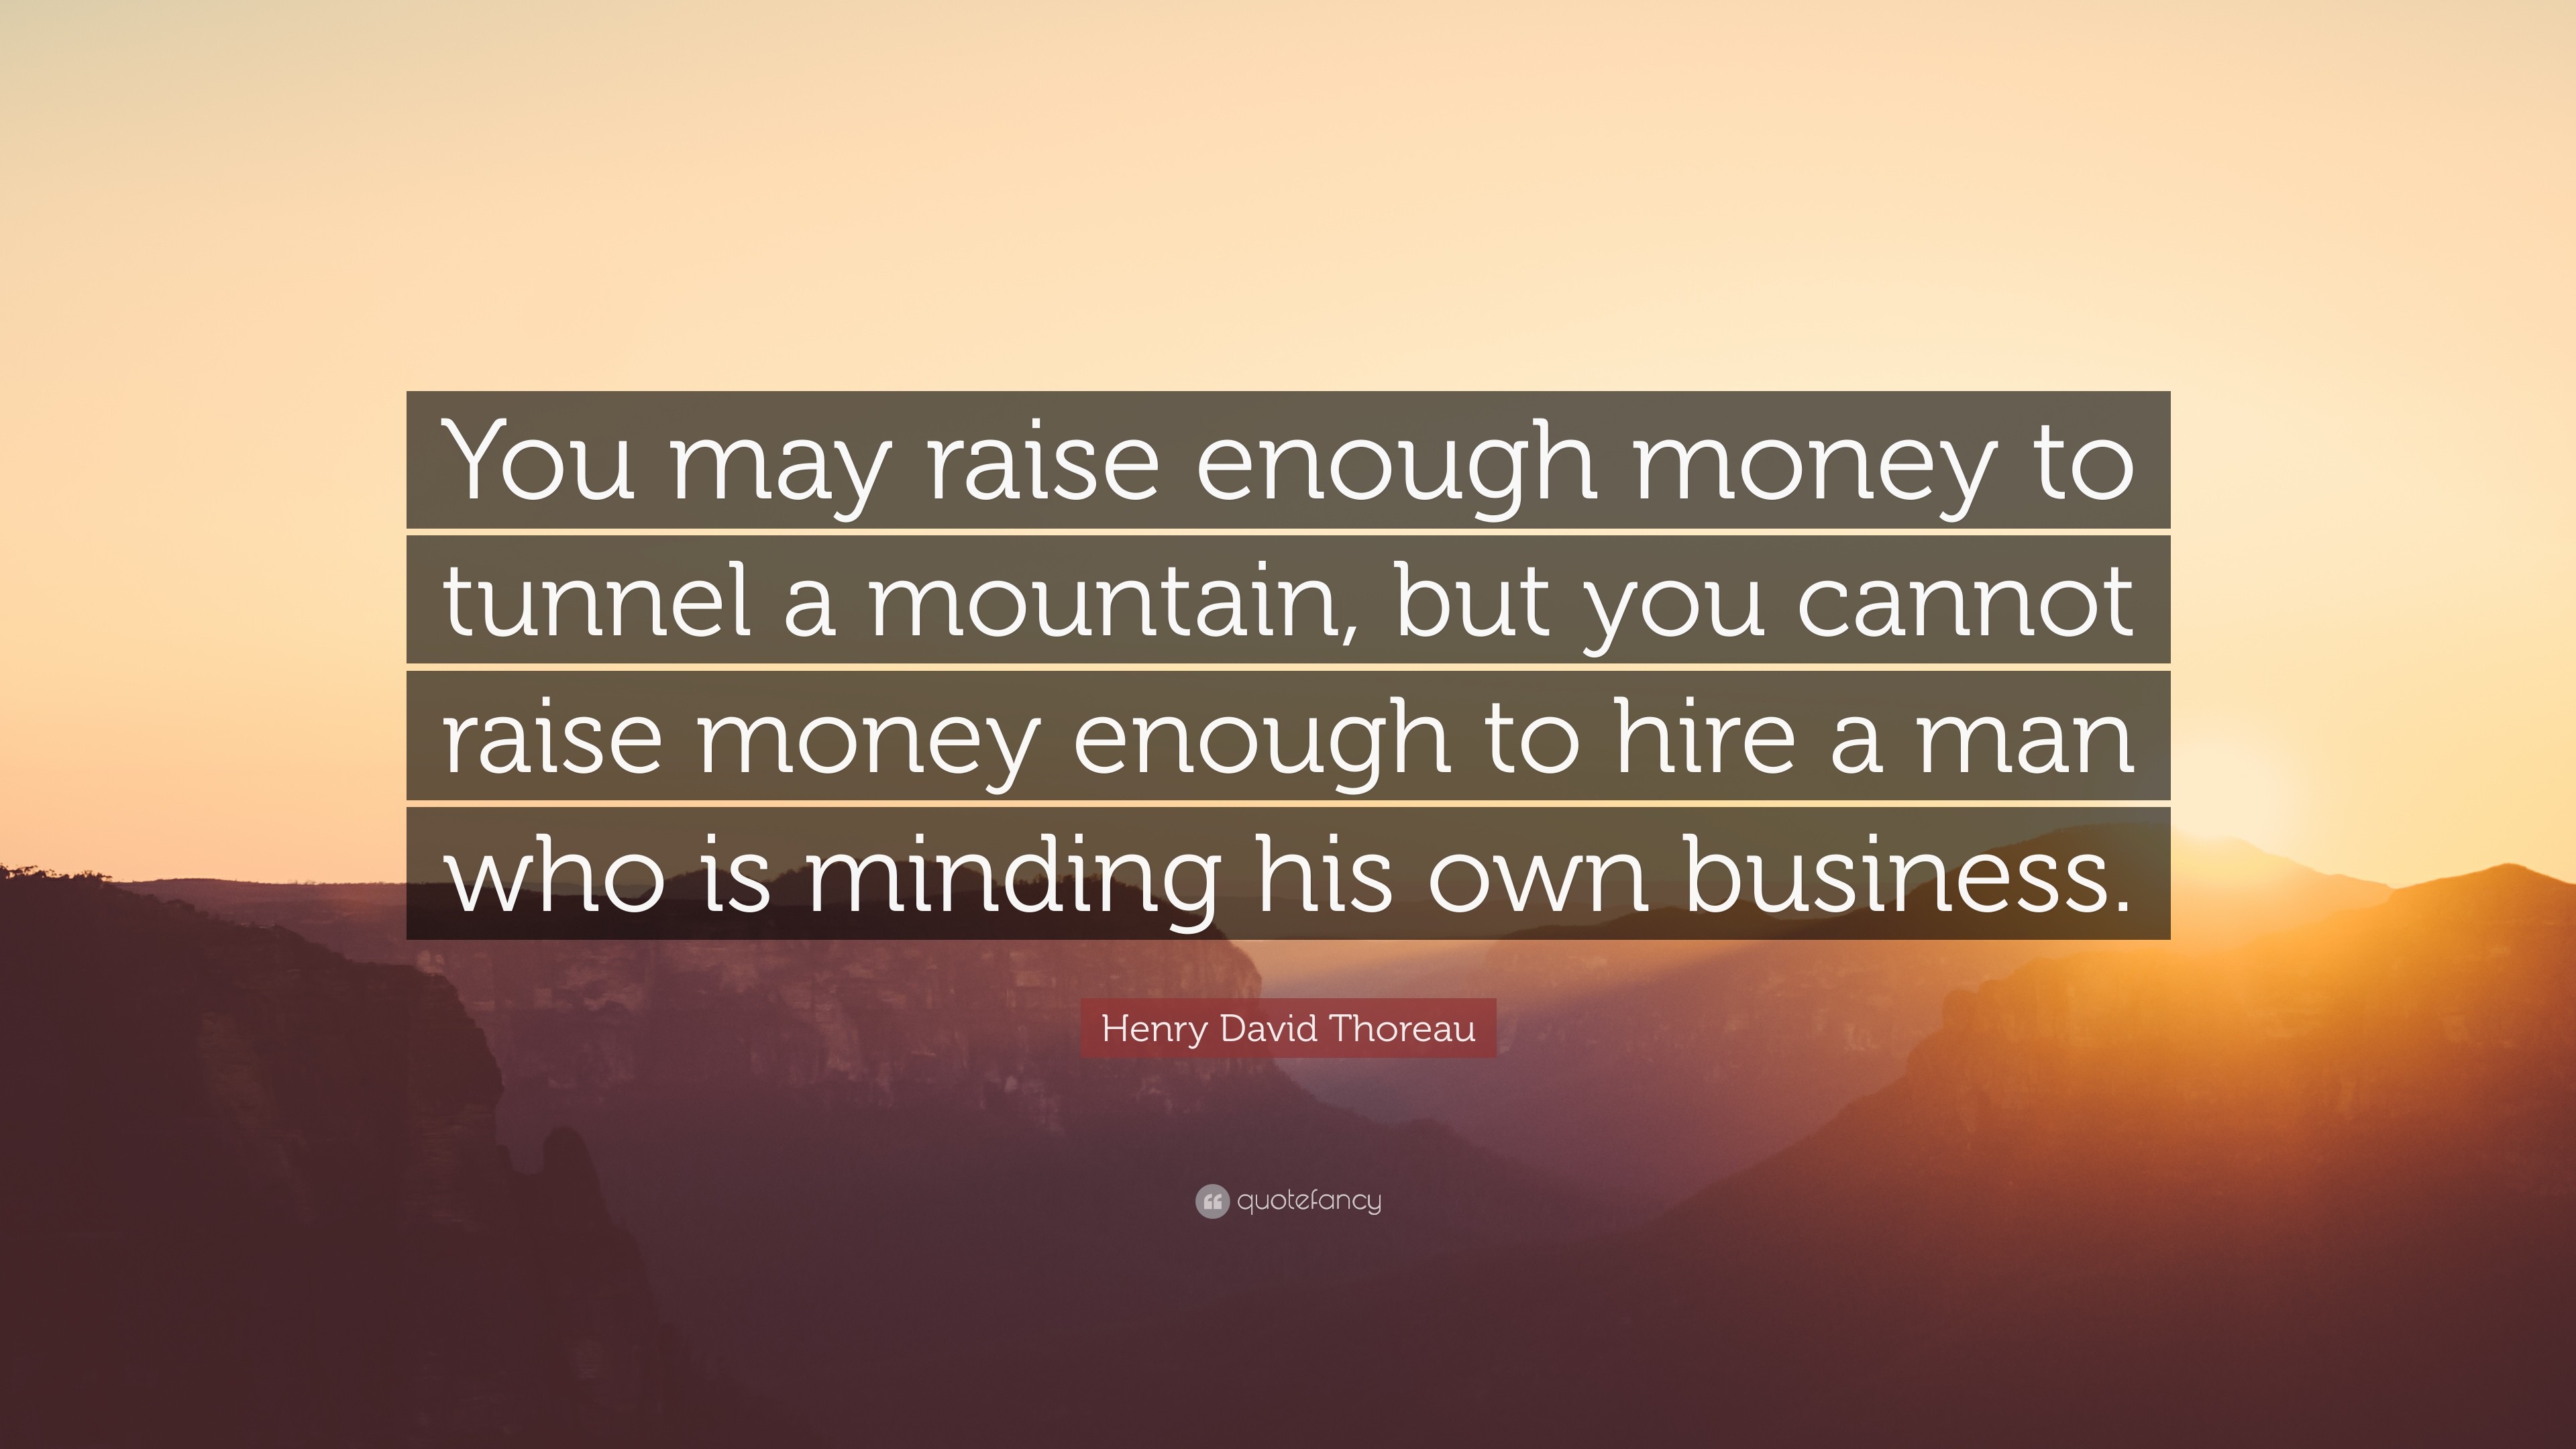 3840x2160 Henry David Thoreau Quote: “You may raise enough money to tunnel a mountain,